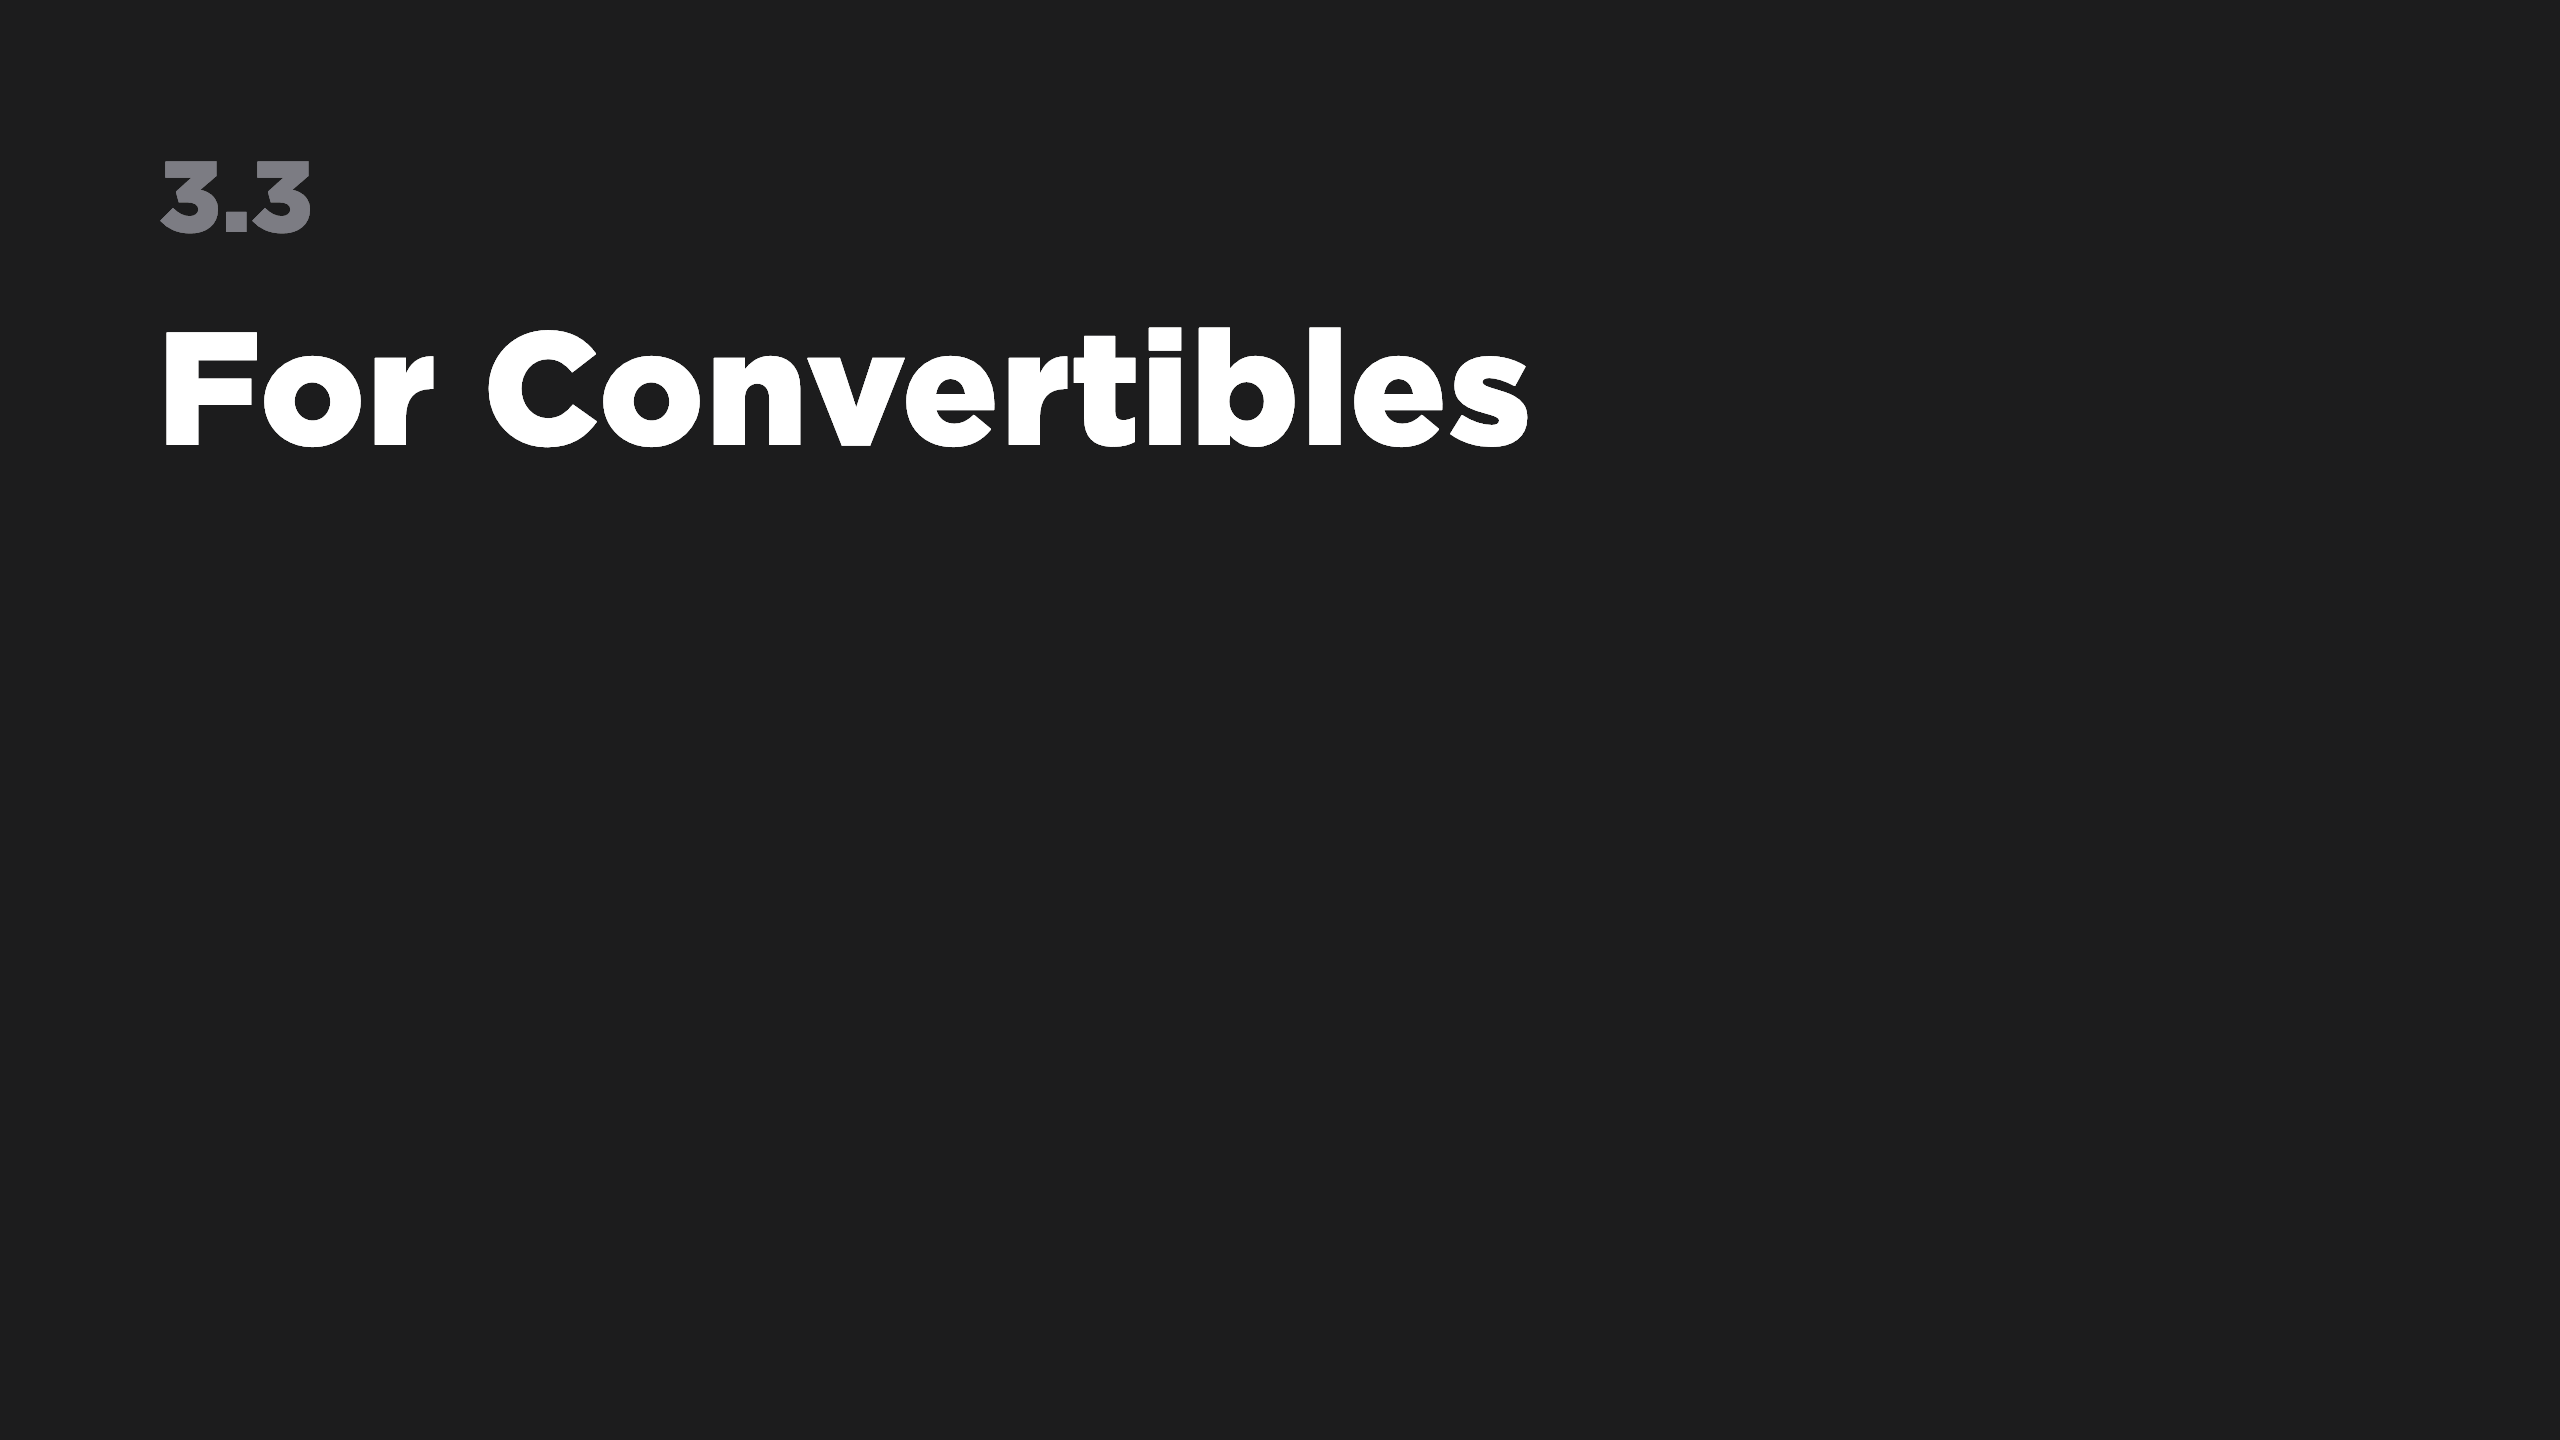 3.3 For Convertibles